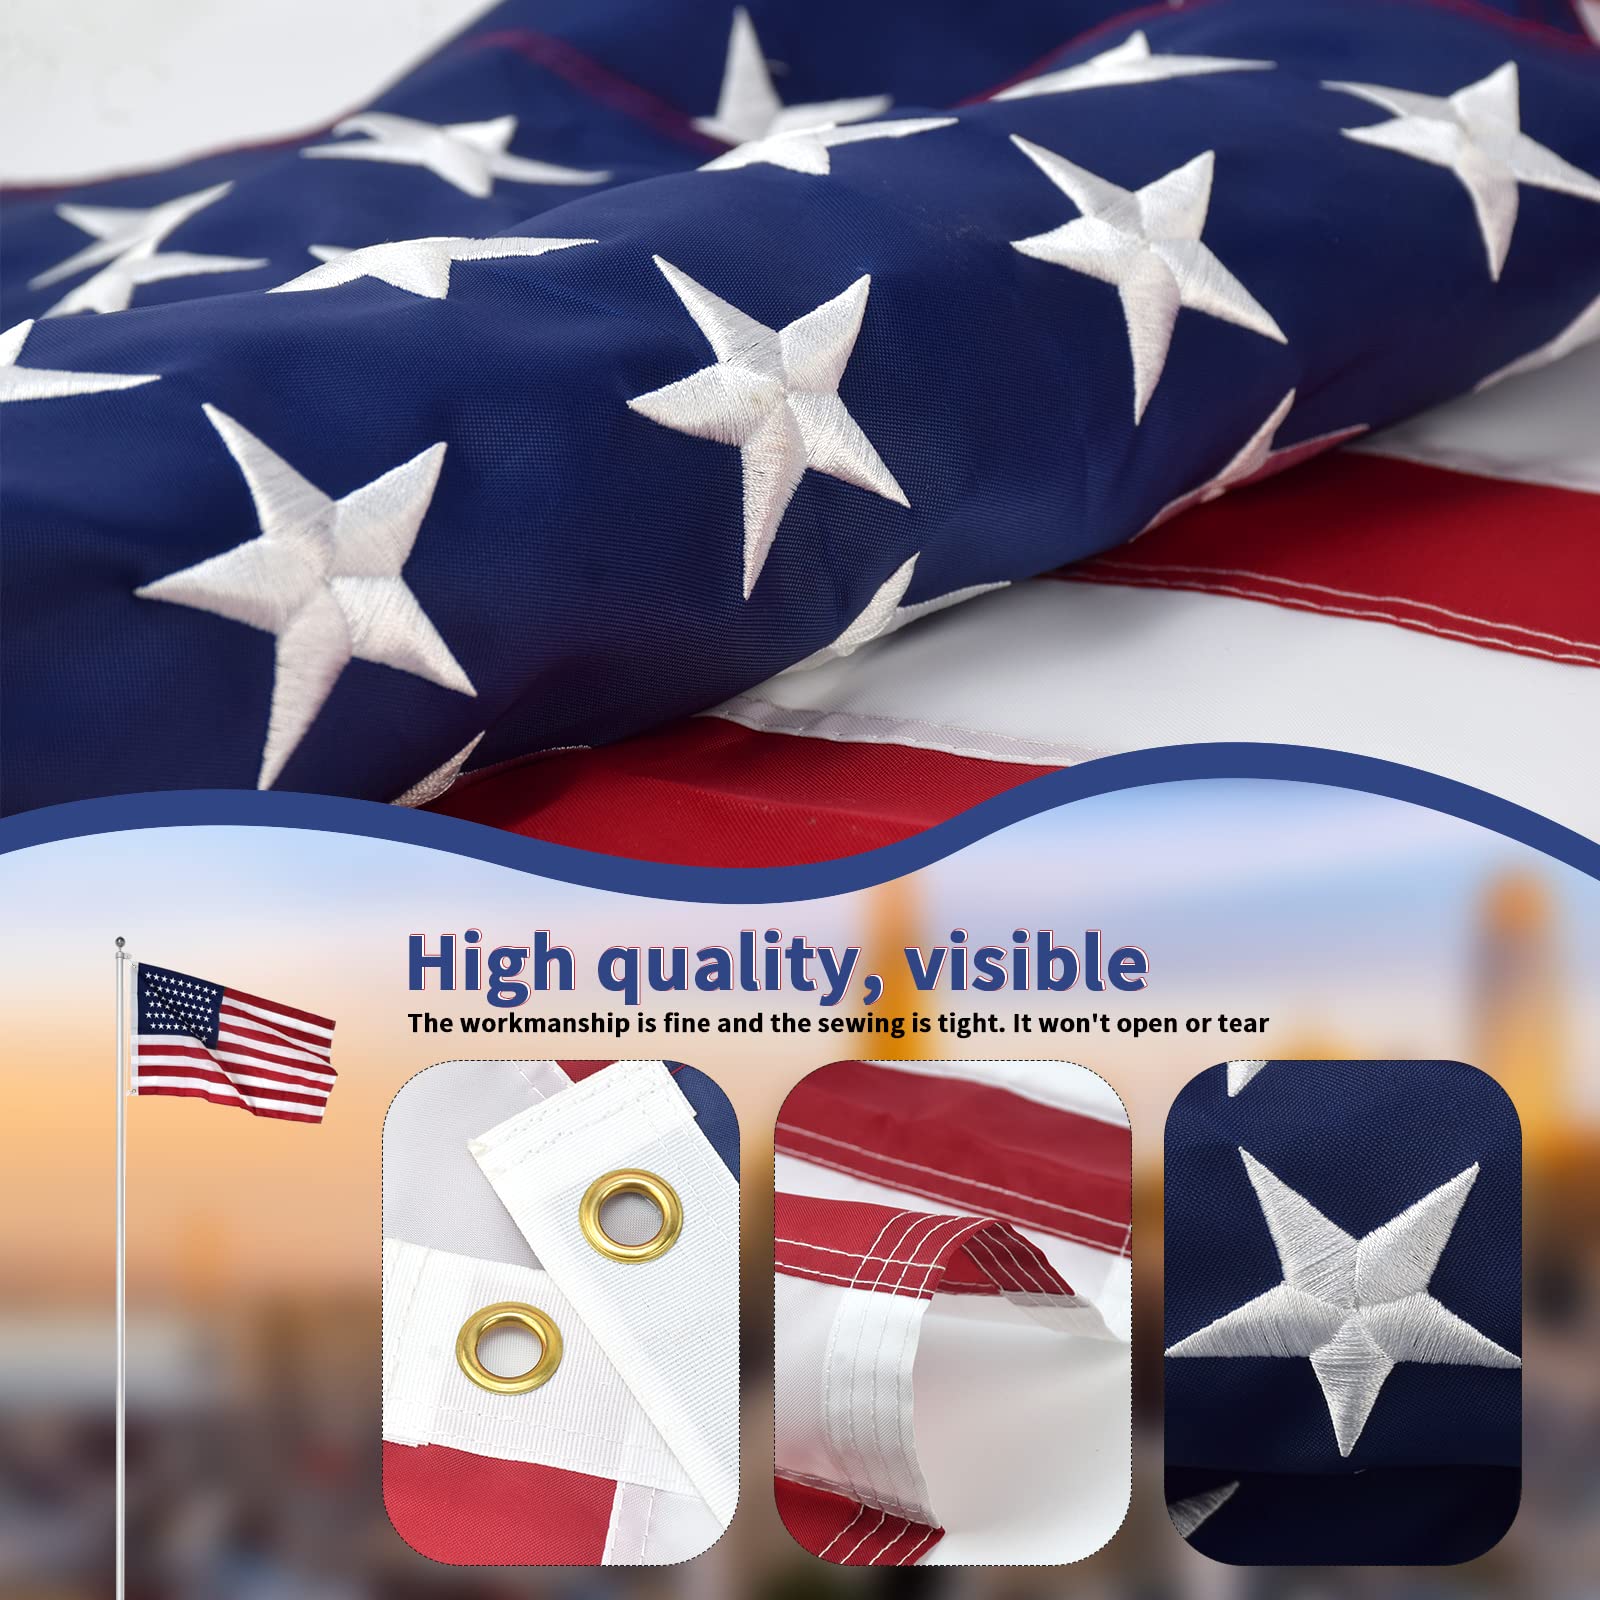 100% Made in USA American Flags 3x5 Ft Outside,American Flag Outdoor Heavy Duty,Us Flag 3x5 Longest Lasting Usa Flag, Built For Outdoor Use,(100% In Usa)